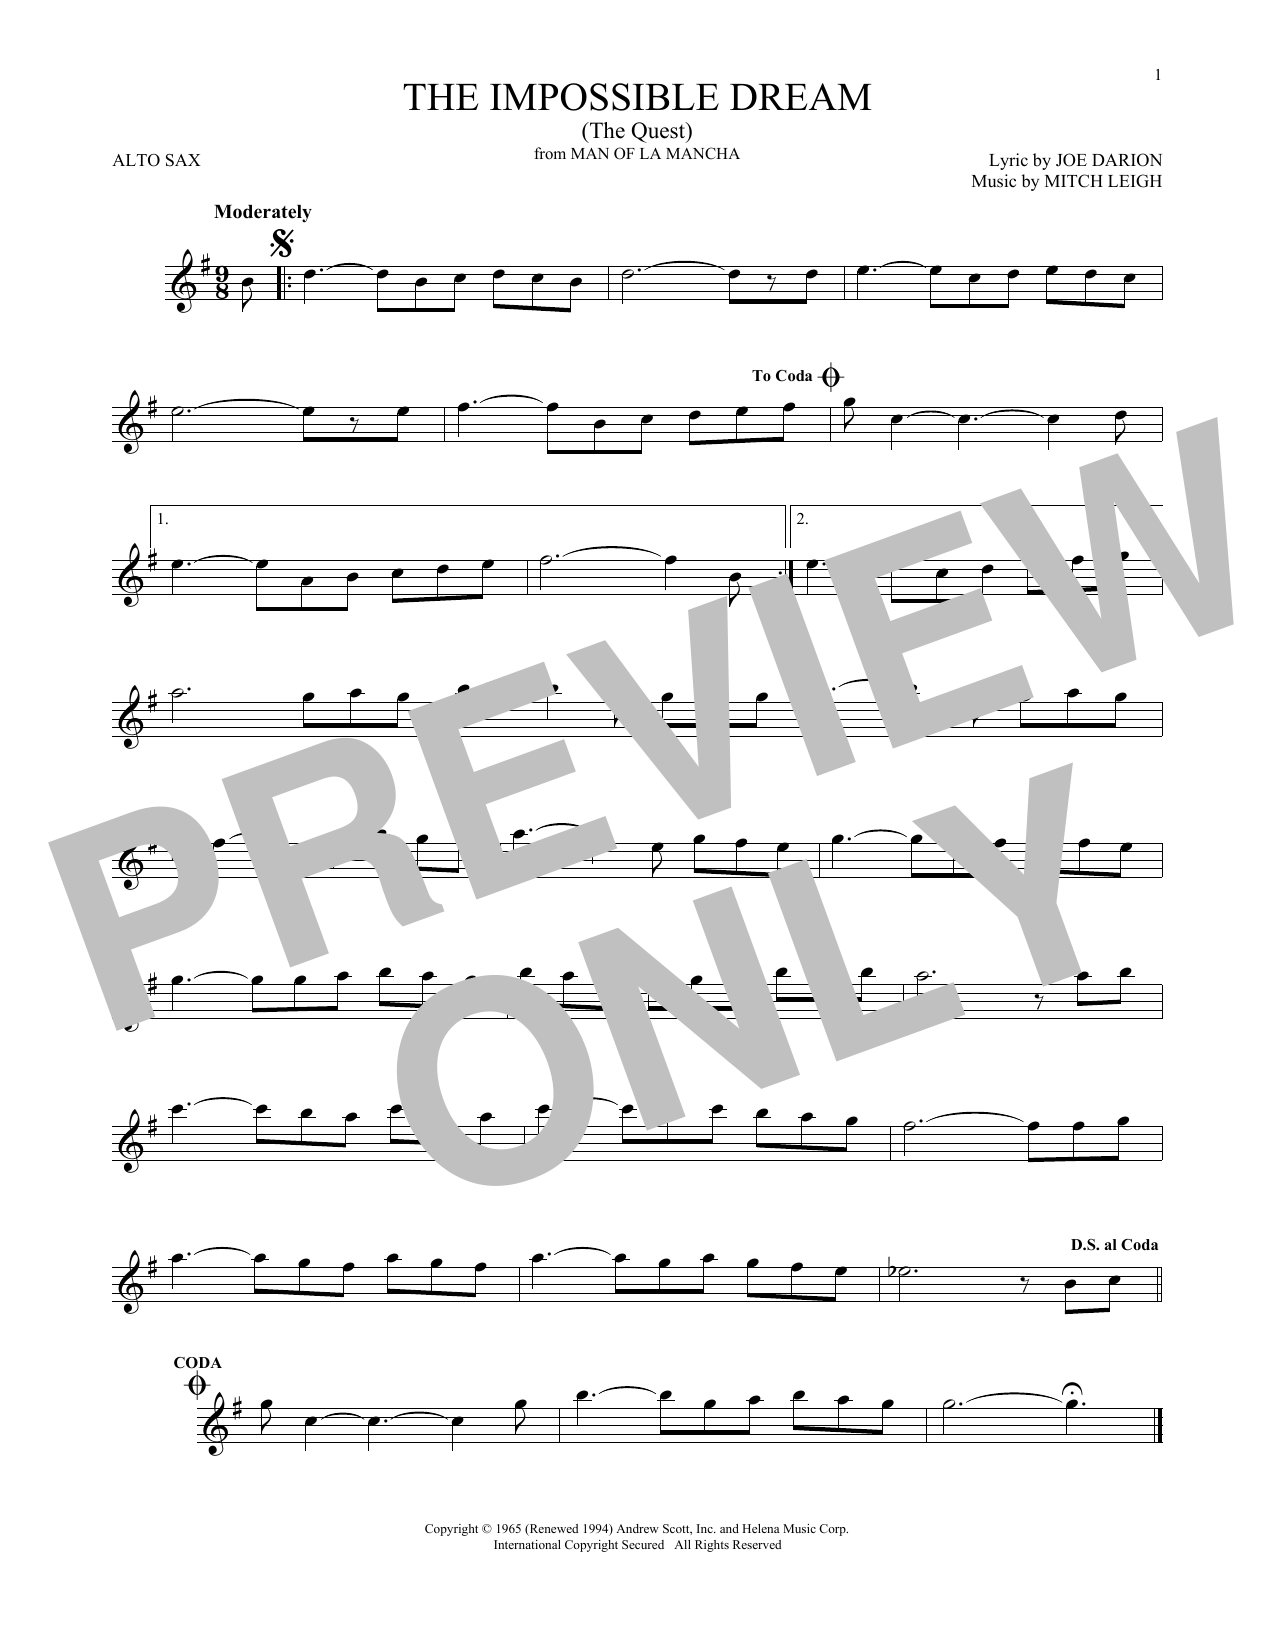 Download Mitch Leigh The Impossible Dream (The Quest) Sheet Music